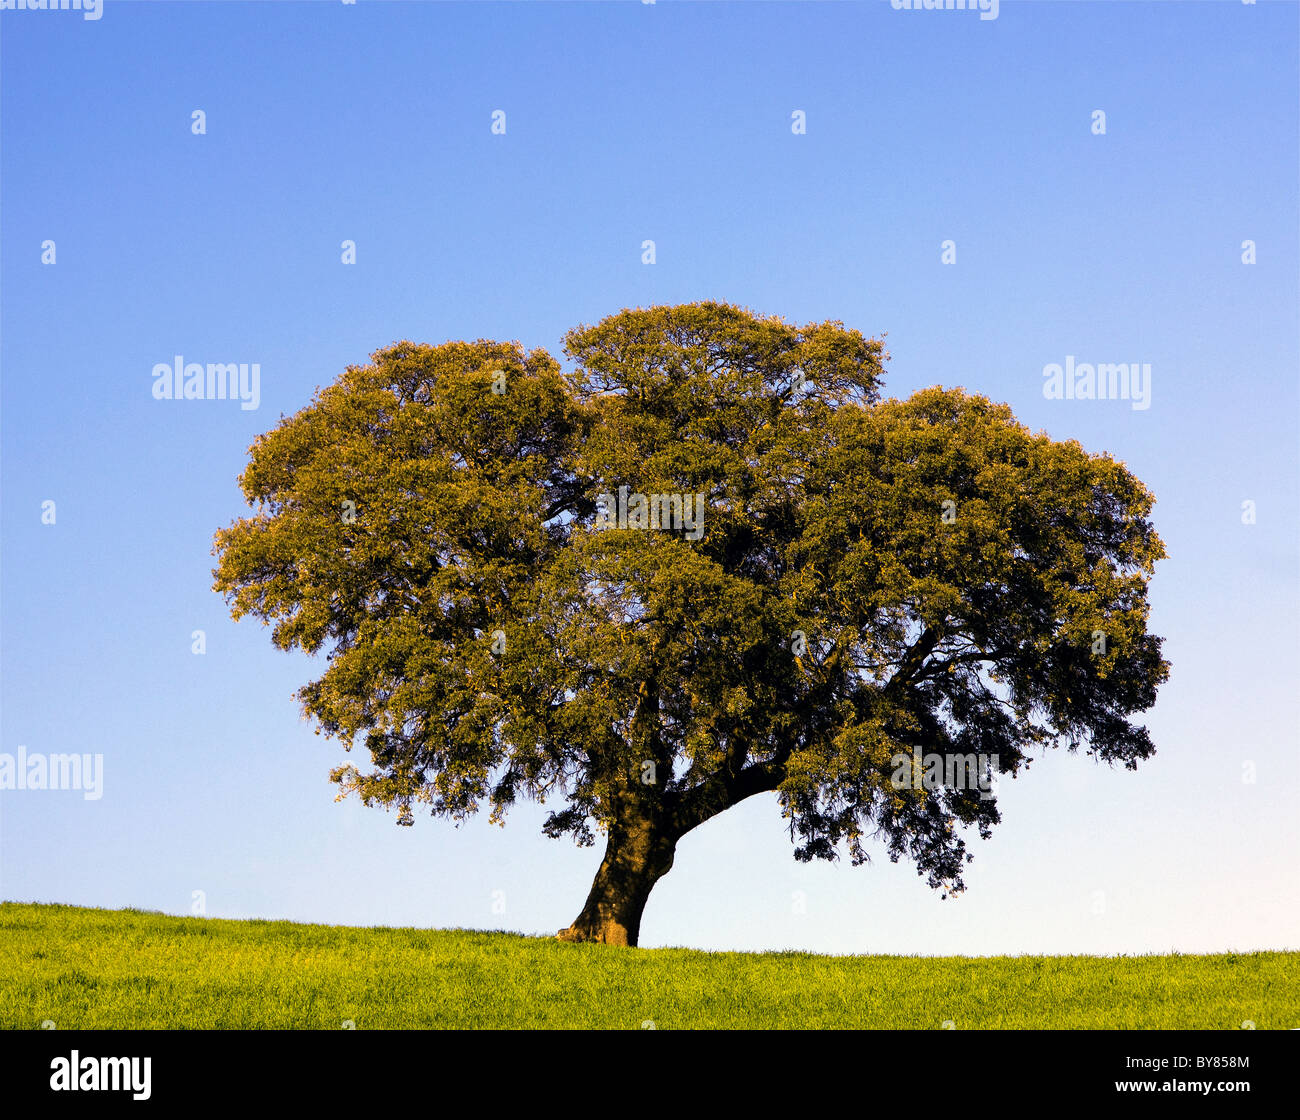 Spain, Andalusia, tree in field Stock Photo